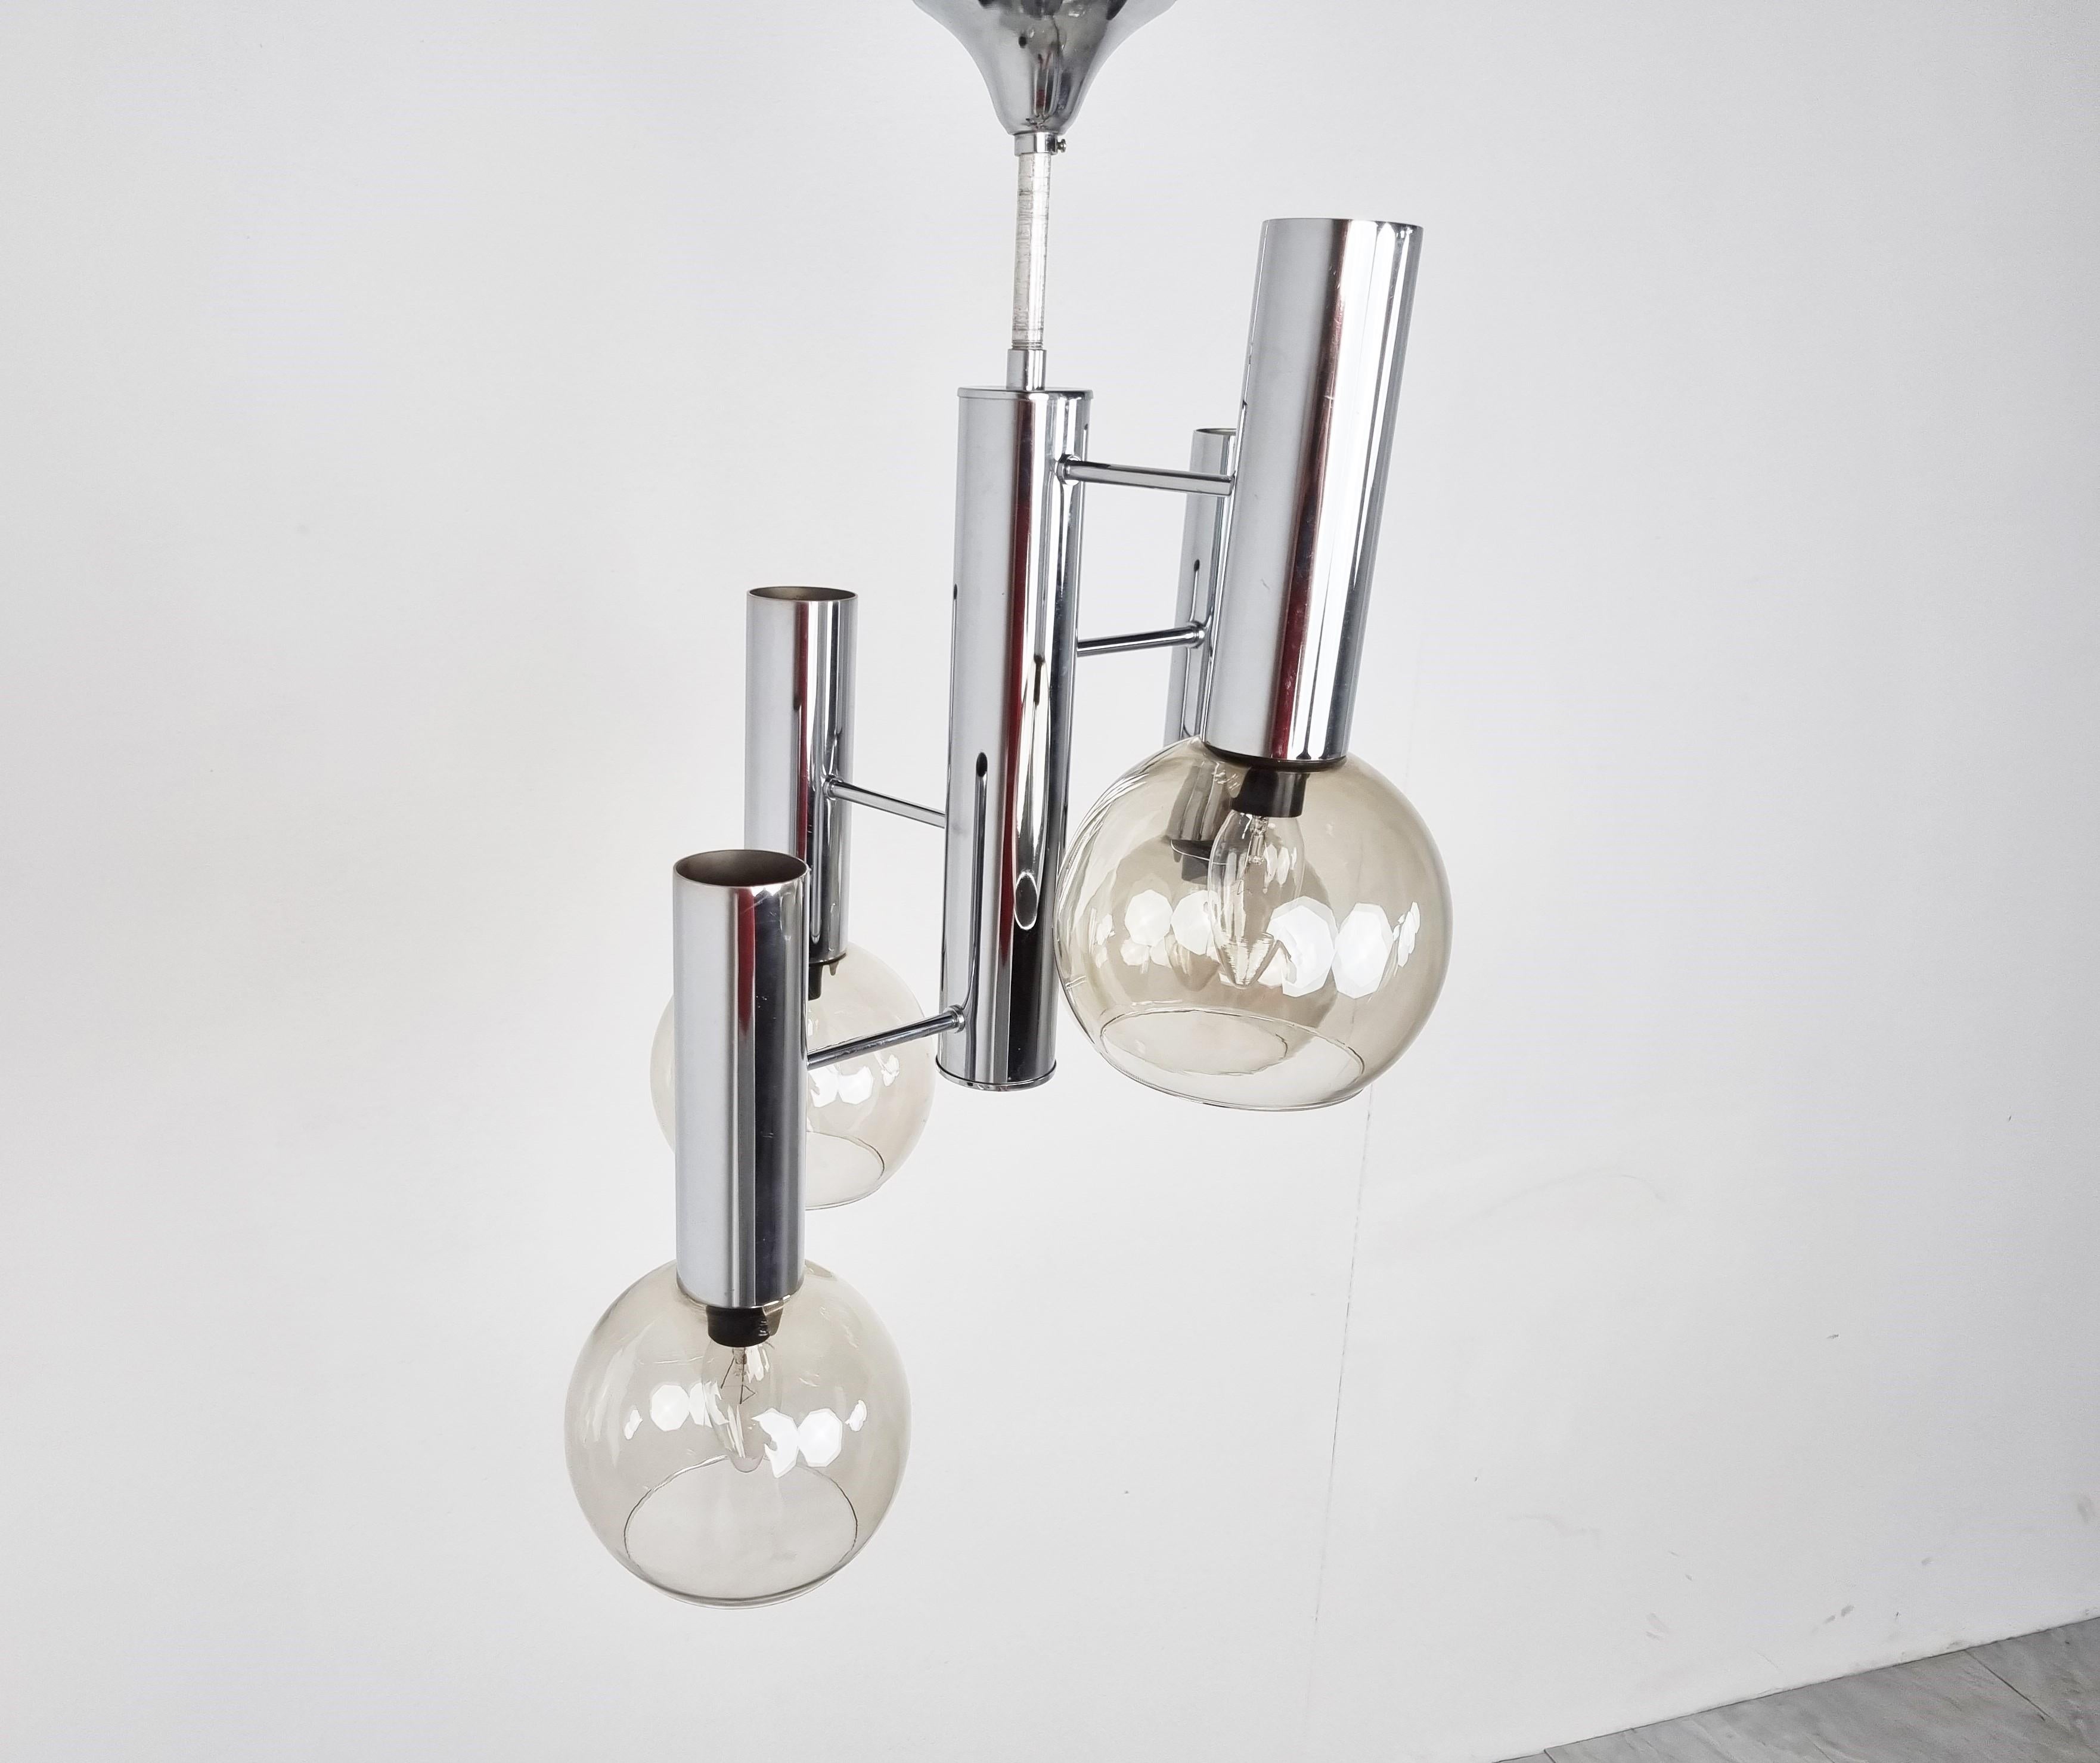 Chromed Italian smoked glass globe chandelier.

This chandelier emits a nice ambient light.

1970s - Italy

We can always adjust the hieght with a chain or another chrome rod. - Please contact us if the current height is not